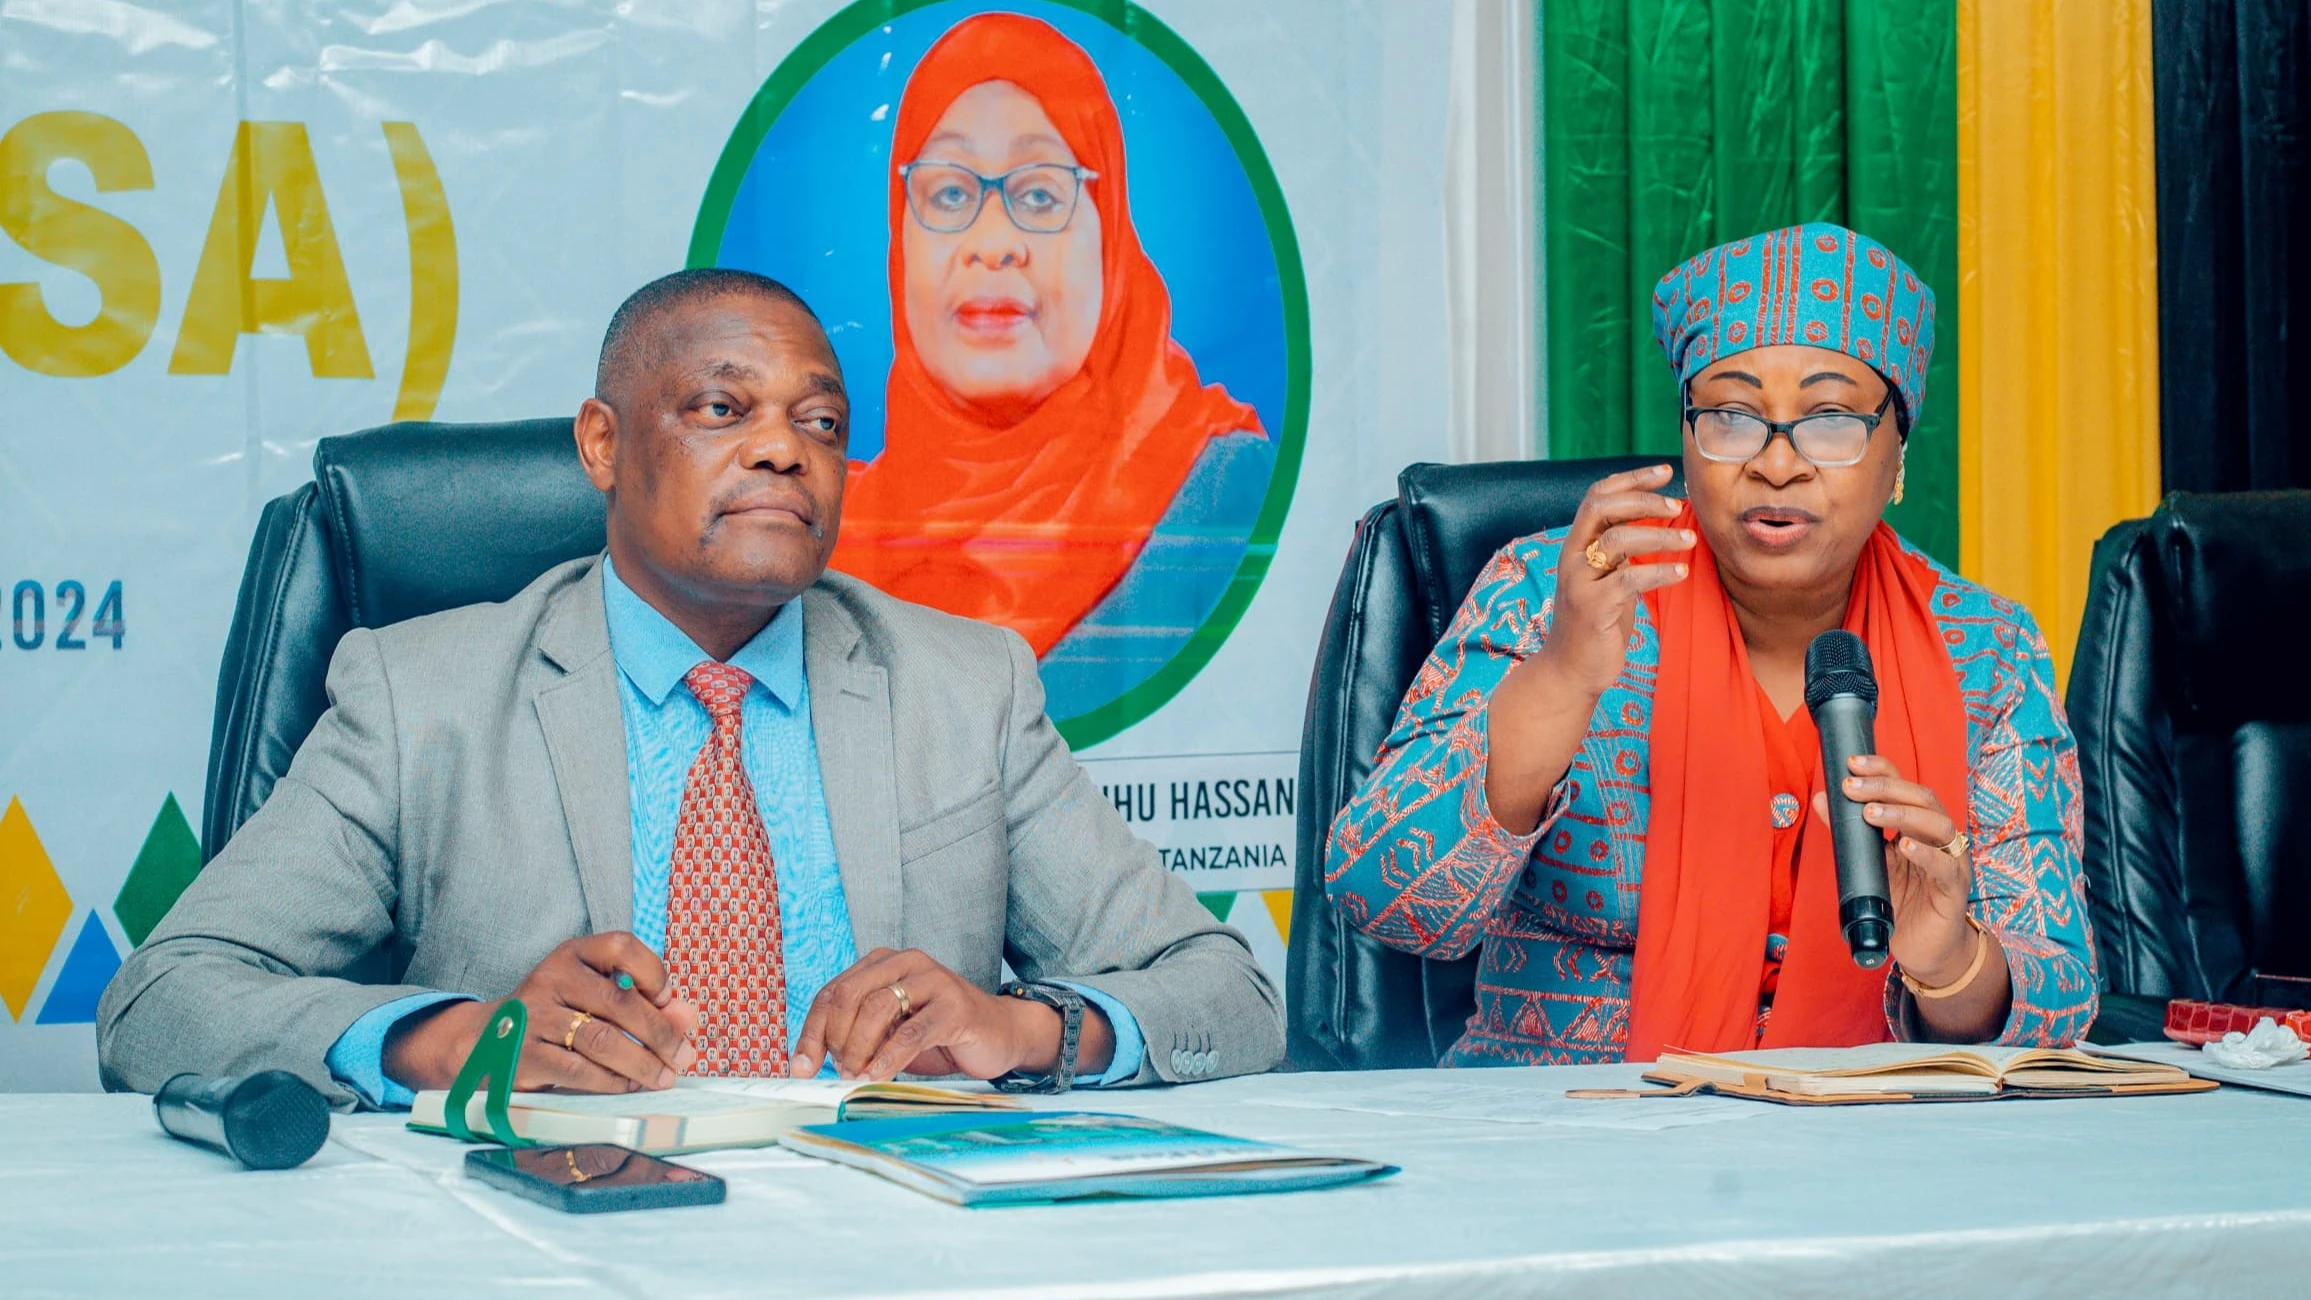 National Economic Empowerment Council (NEEC) executive secretary Beng'i Issa addressed women, youth, and special groups when the council introduced the “Strengthening the Economy with Mama Samia” program in Mtwara Region on Tuesday.